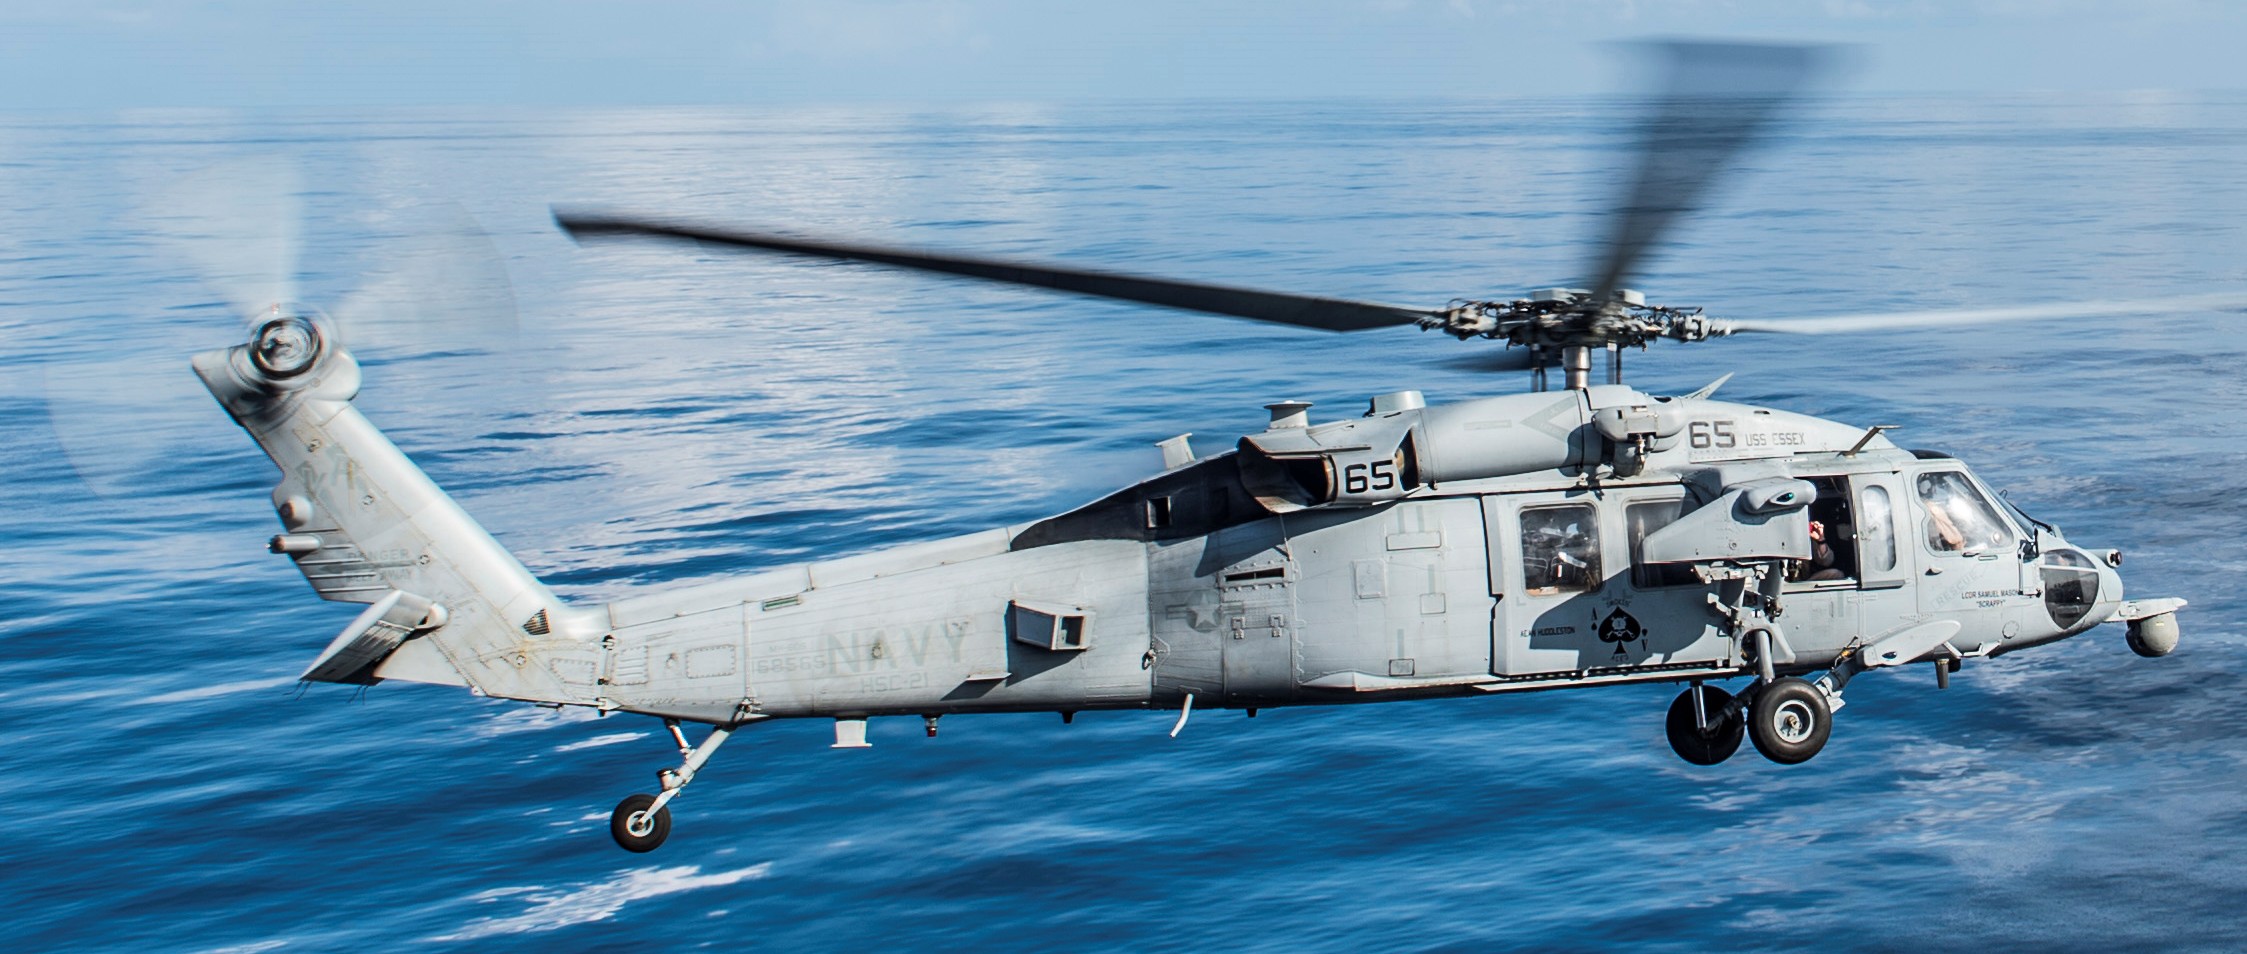 helicopter sea combat squadron hsc-21 blackjacks mh-60s seahawk us navy